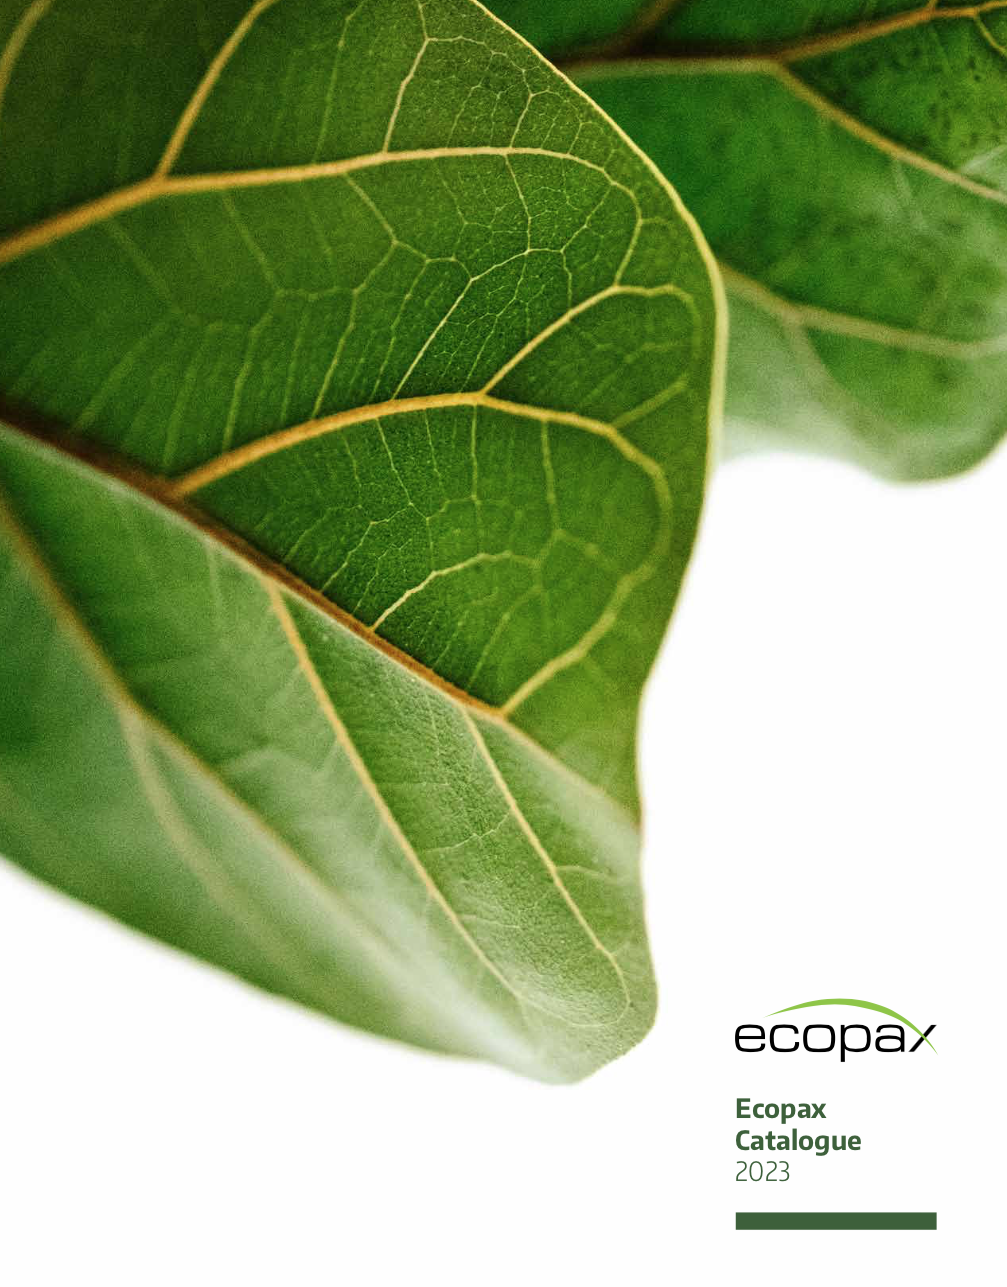 Ecopax Inc 2023 Product Ecopax Catalog Cover with Green Leaf